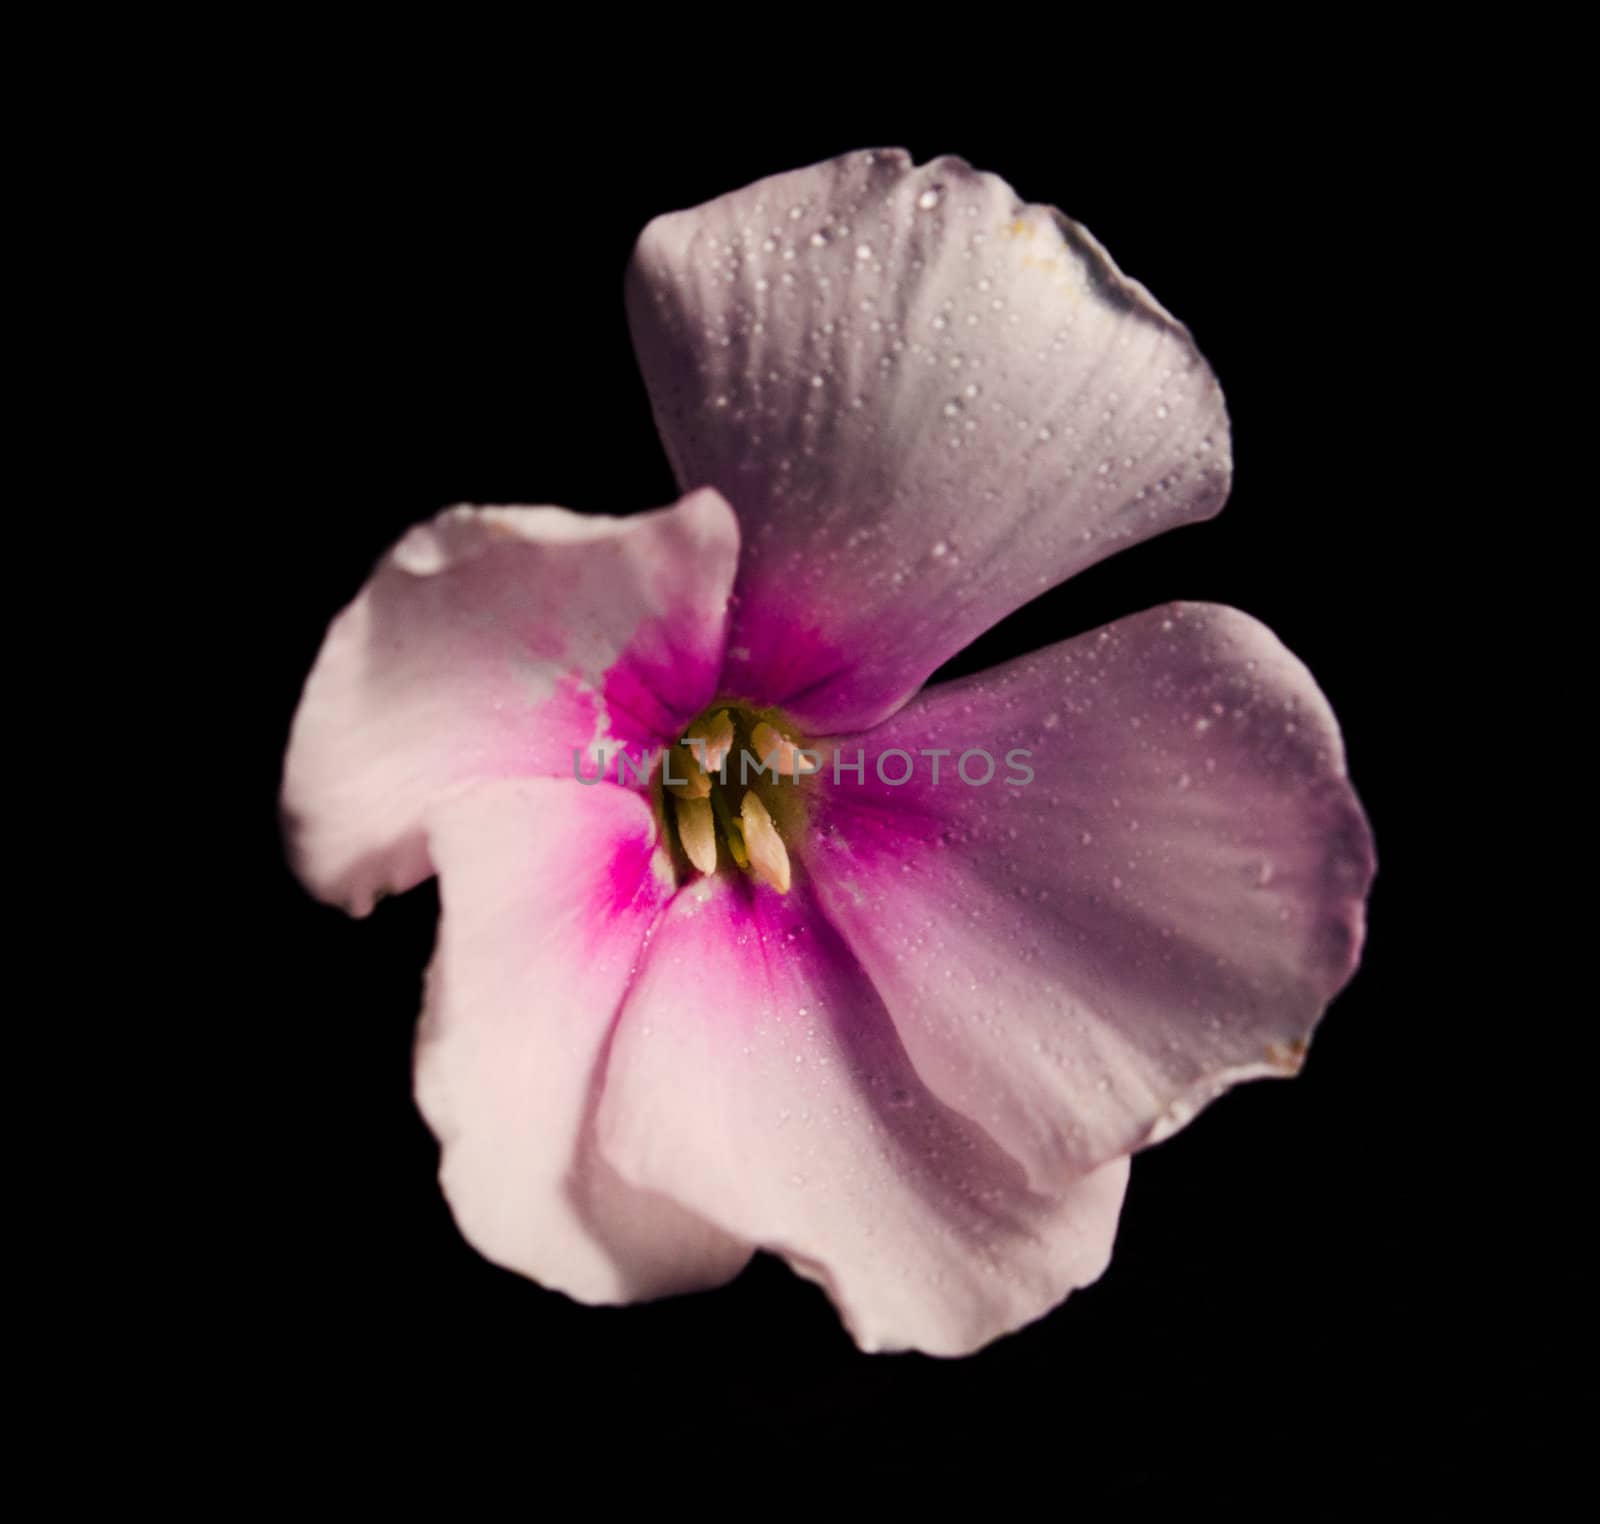 Abstract honey suckle flower shot with studio light.